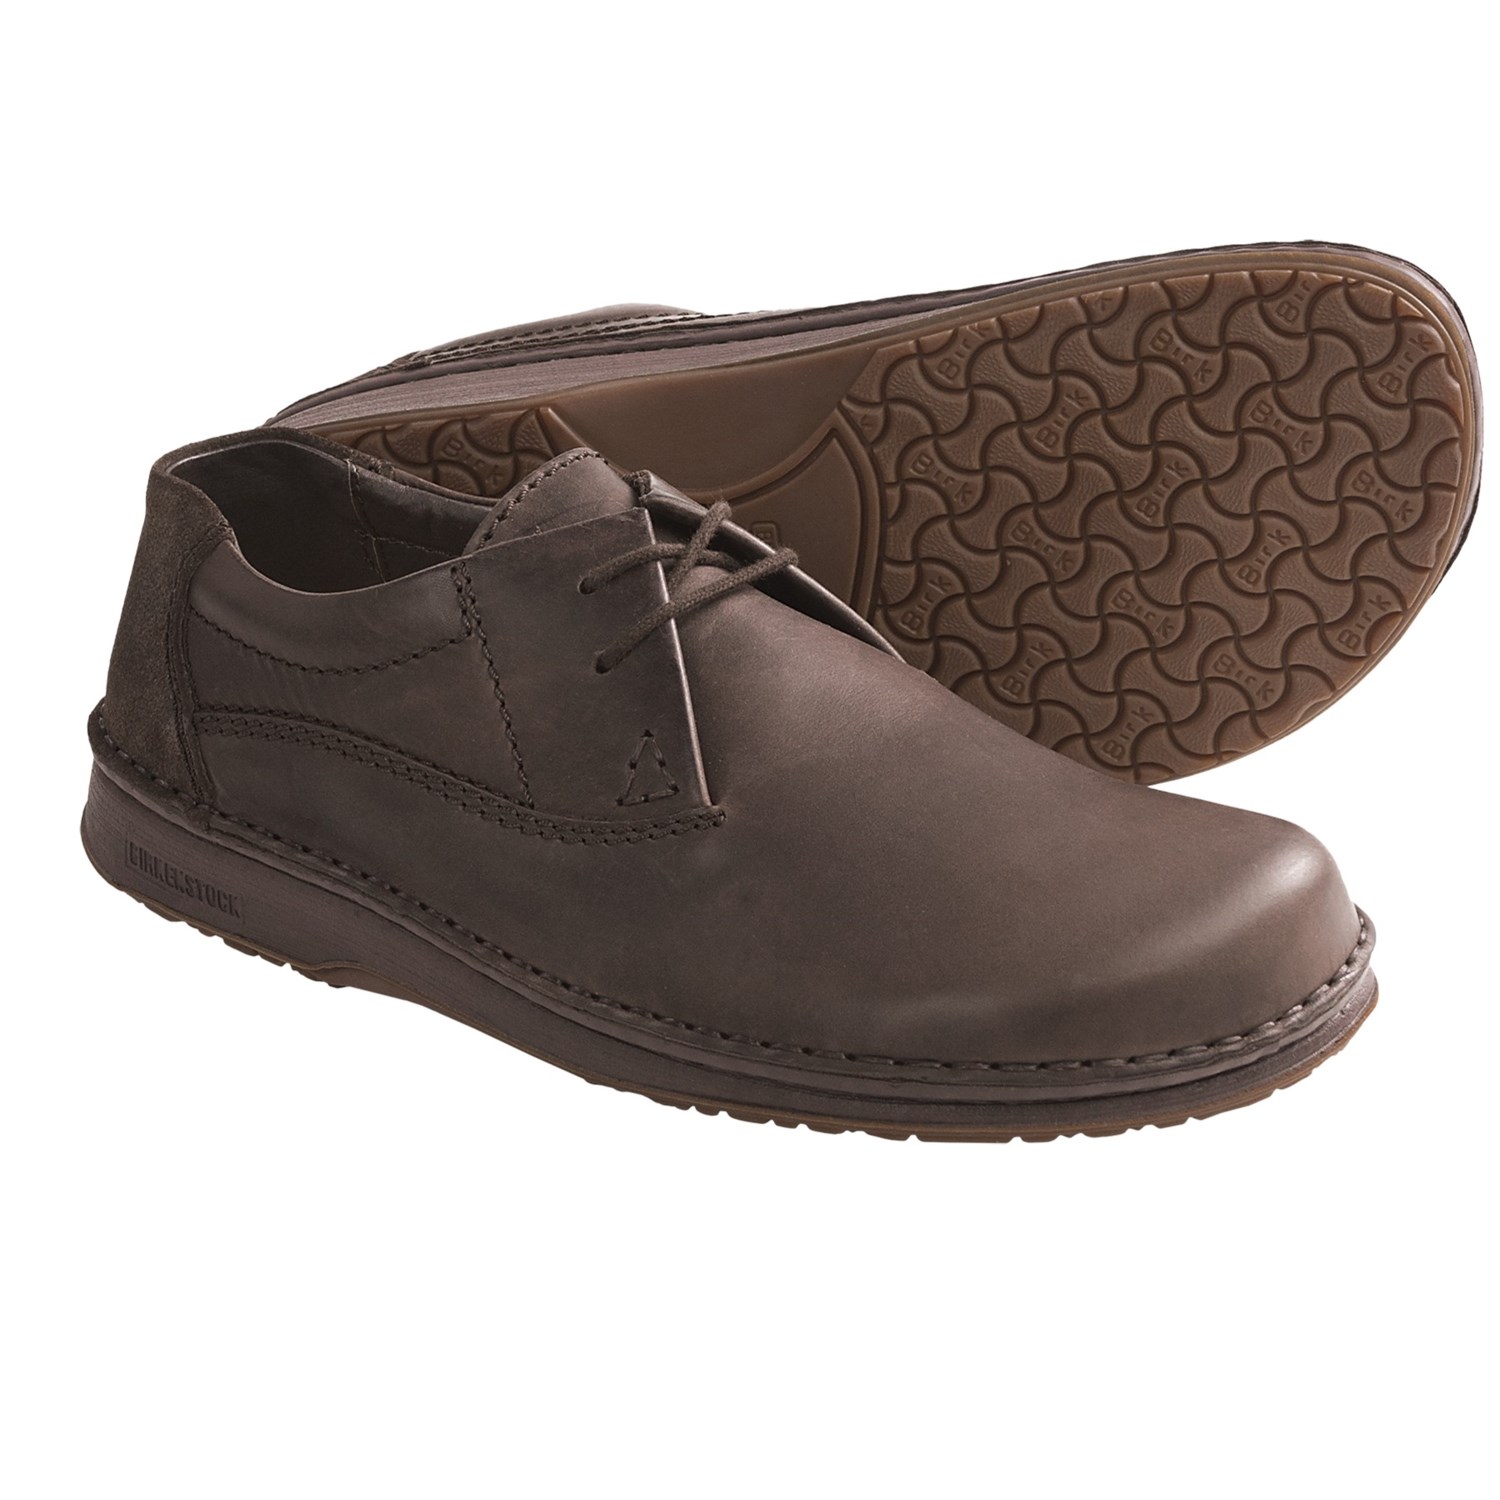 Footprints by Birkenstock Memphis Oxford Shoes - Leather (For Men) in ...